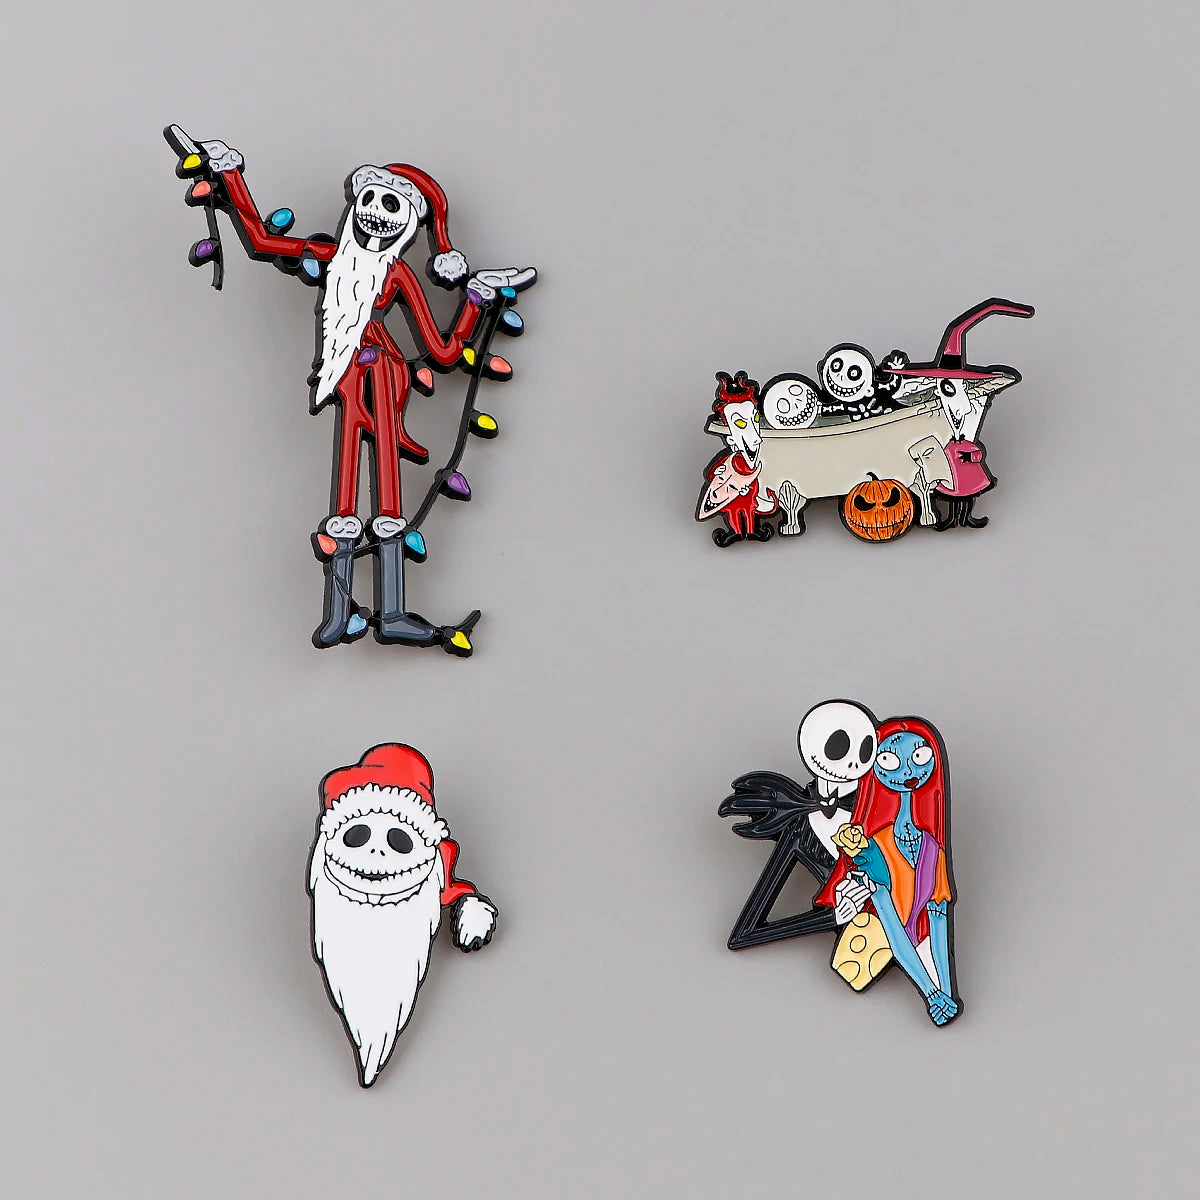 Enamel Pin - The Nightmare Before Christmas Pins